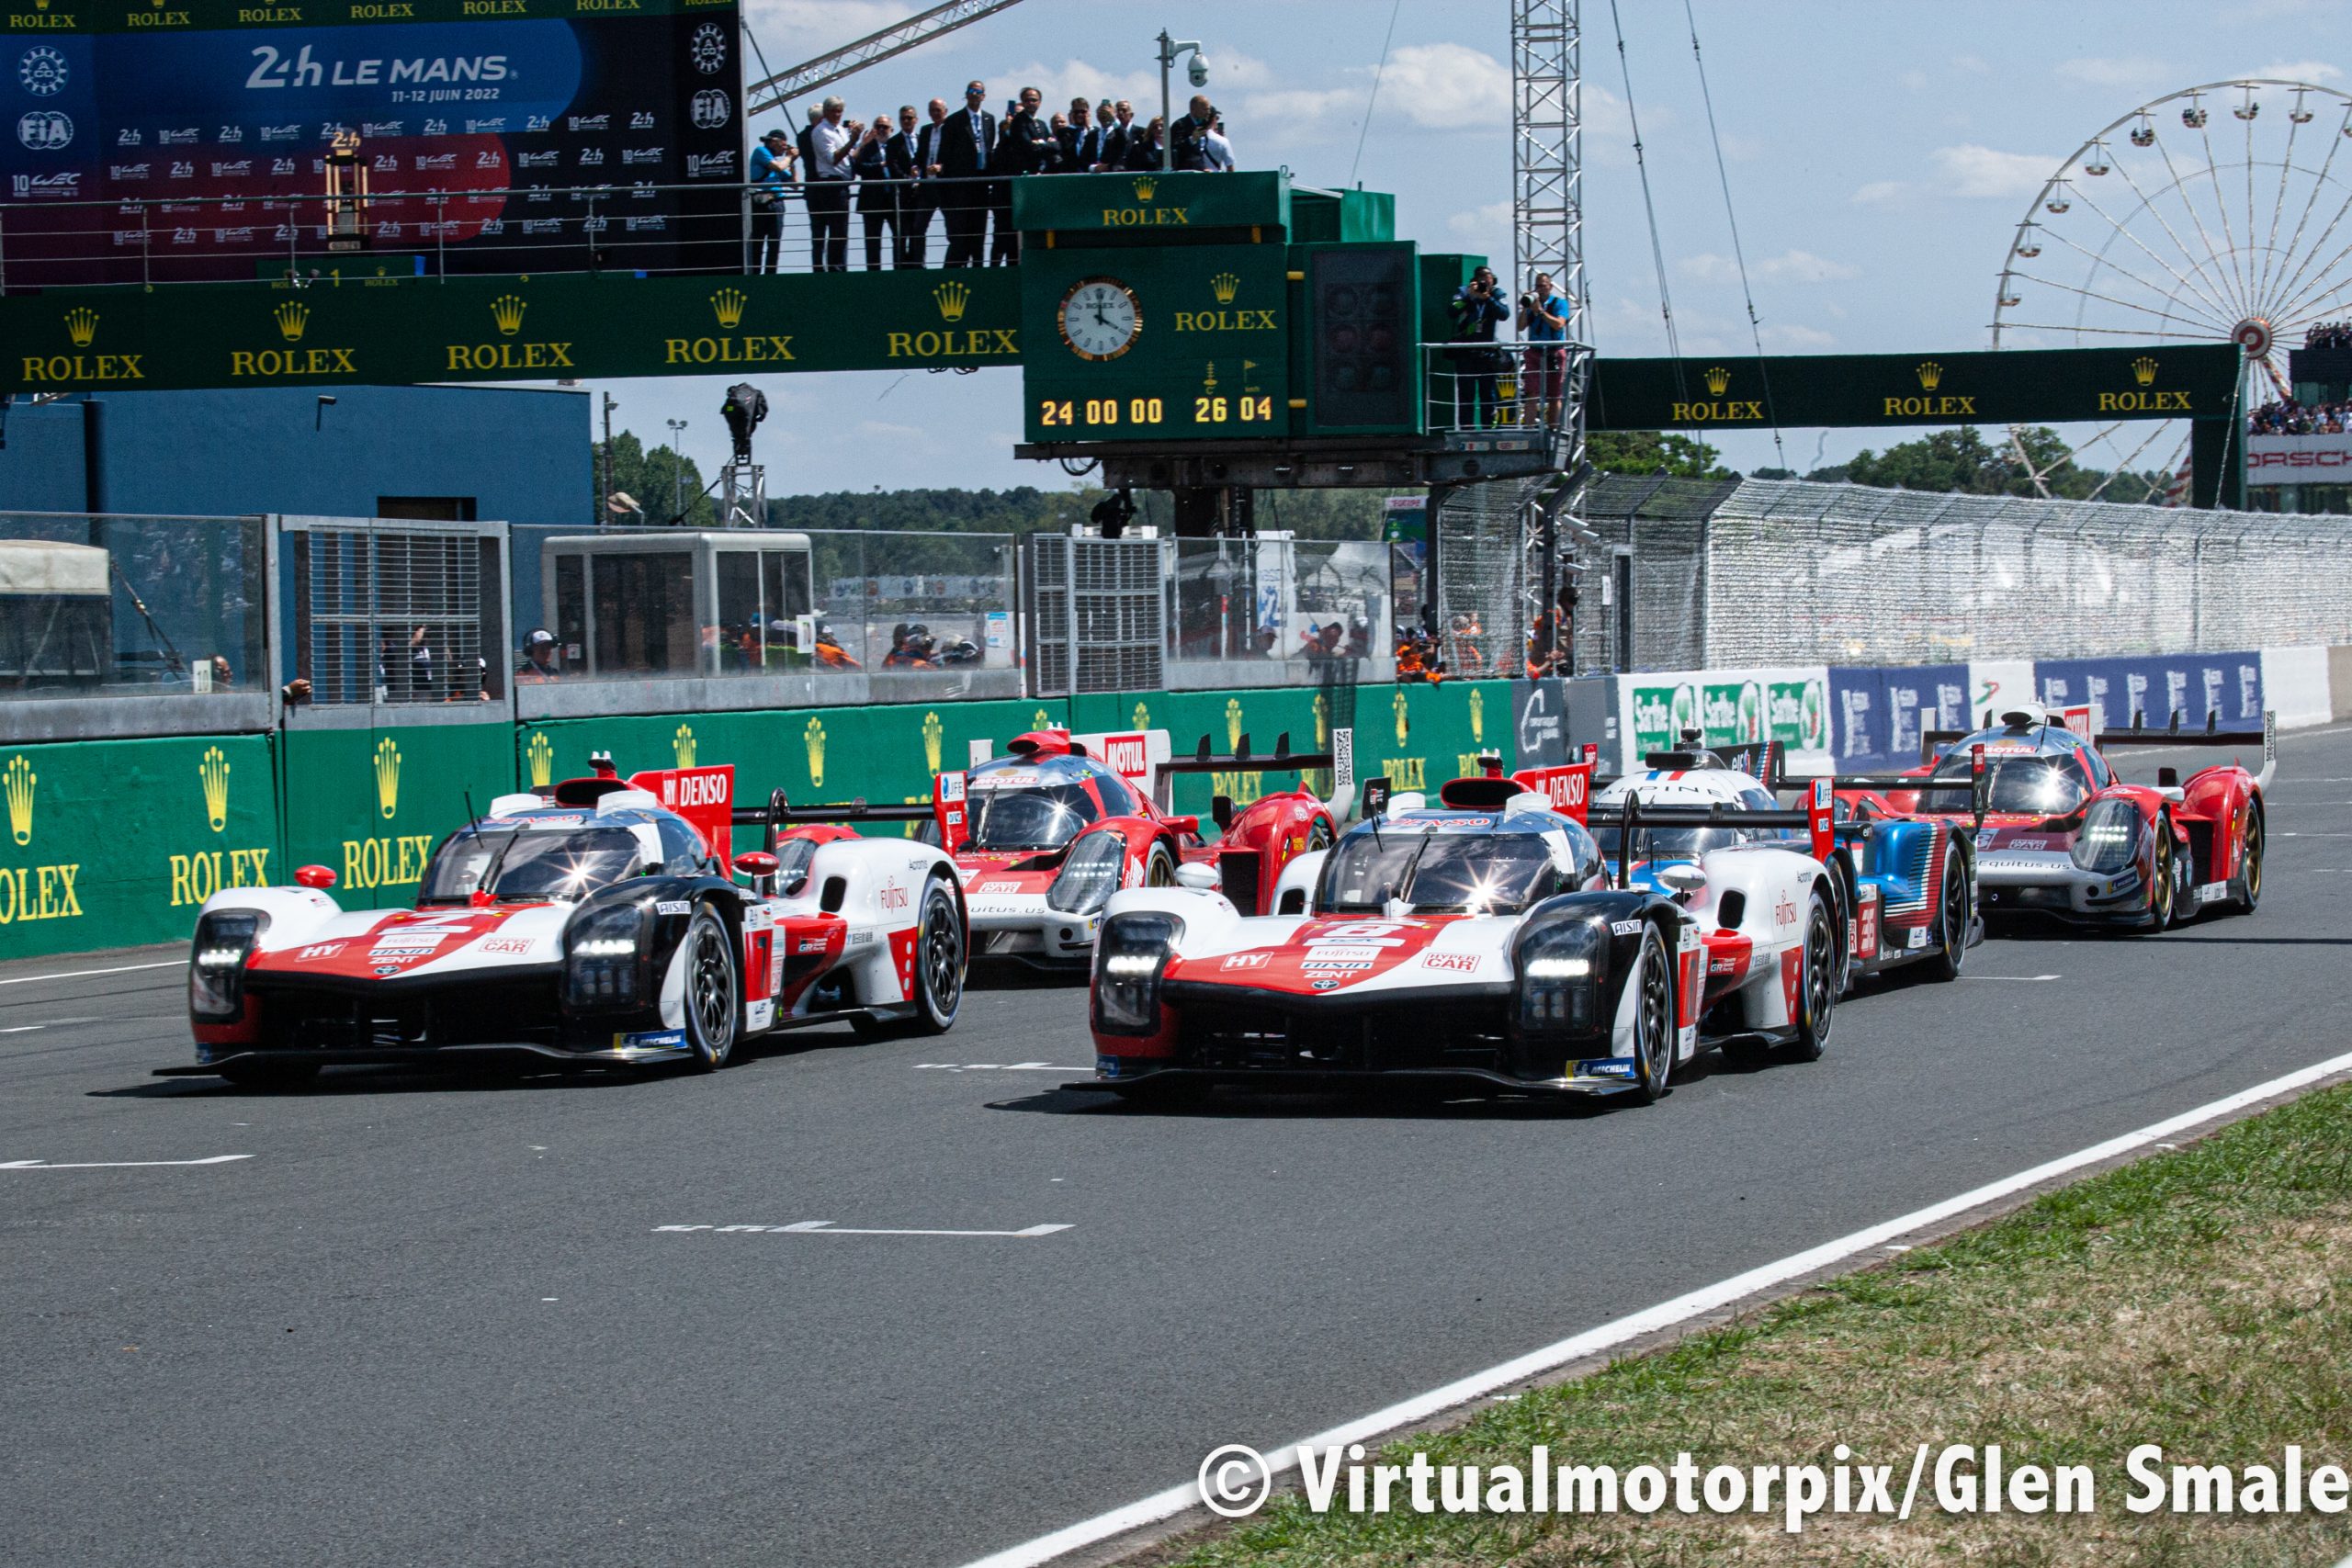 The No. 8 Toyota (closest to the camera) leads the Hypercar class across the start line